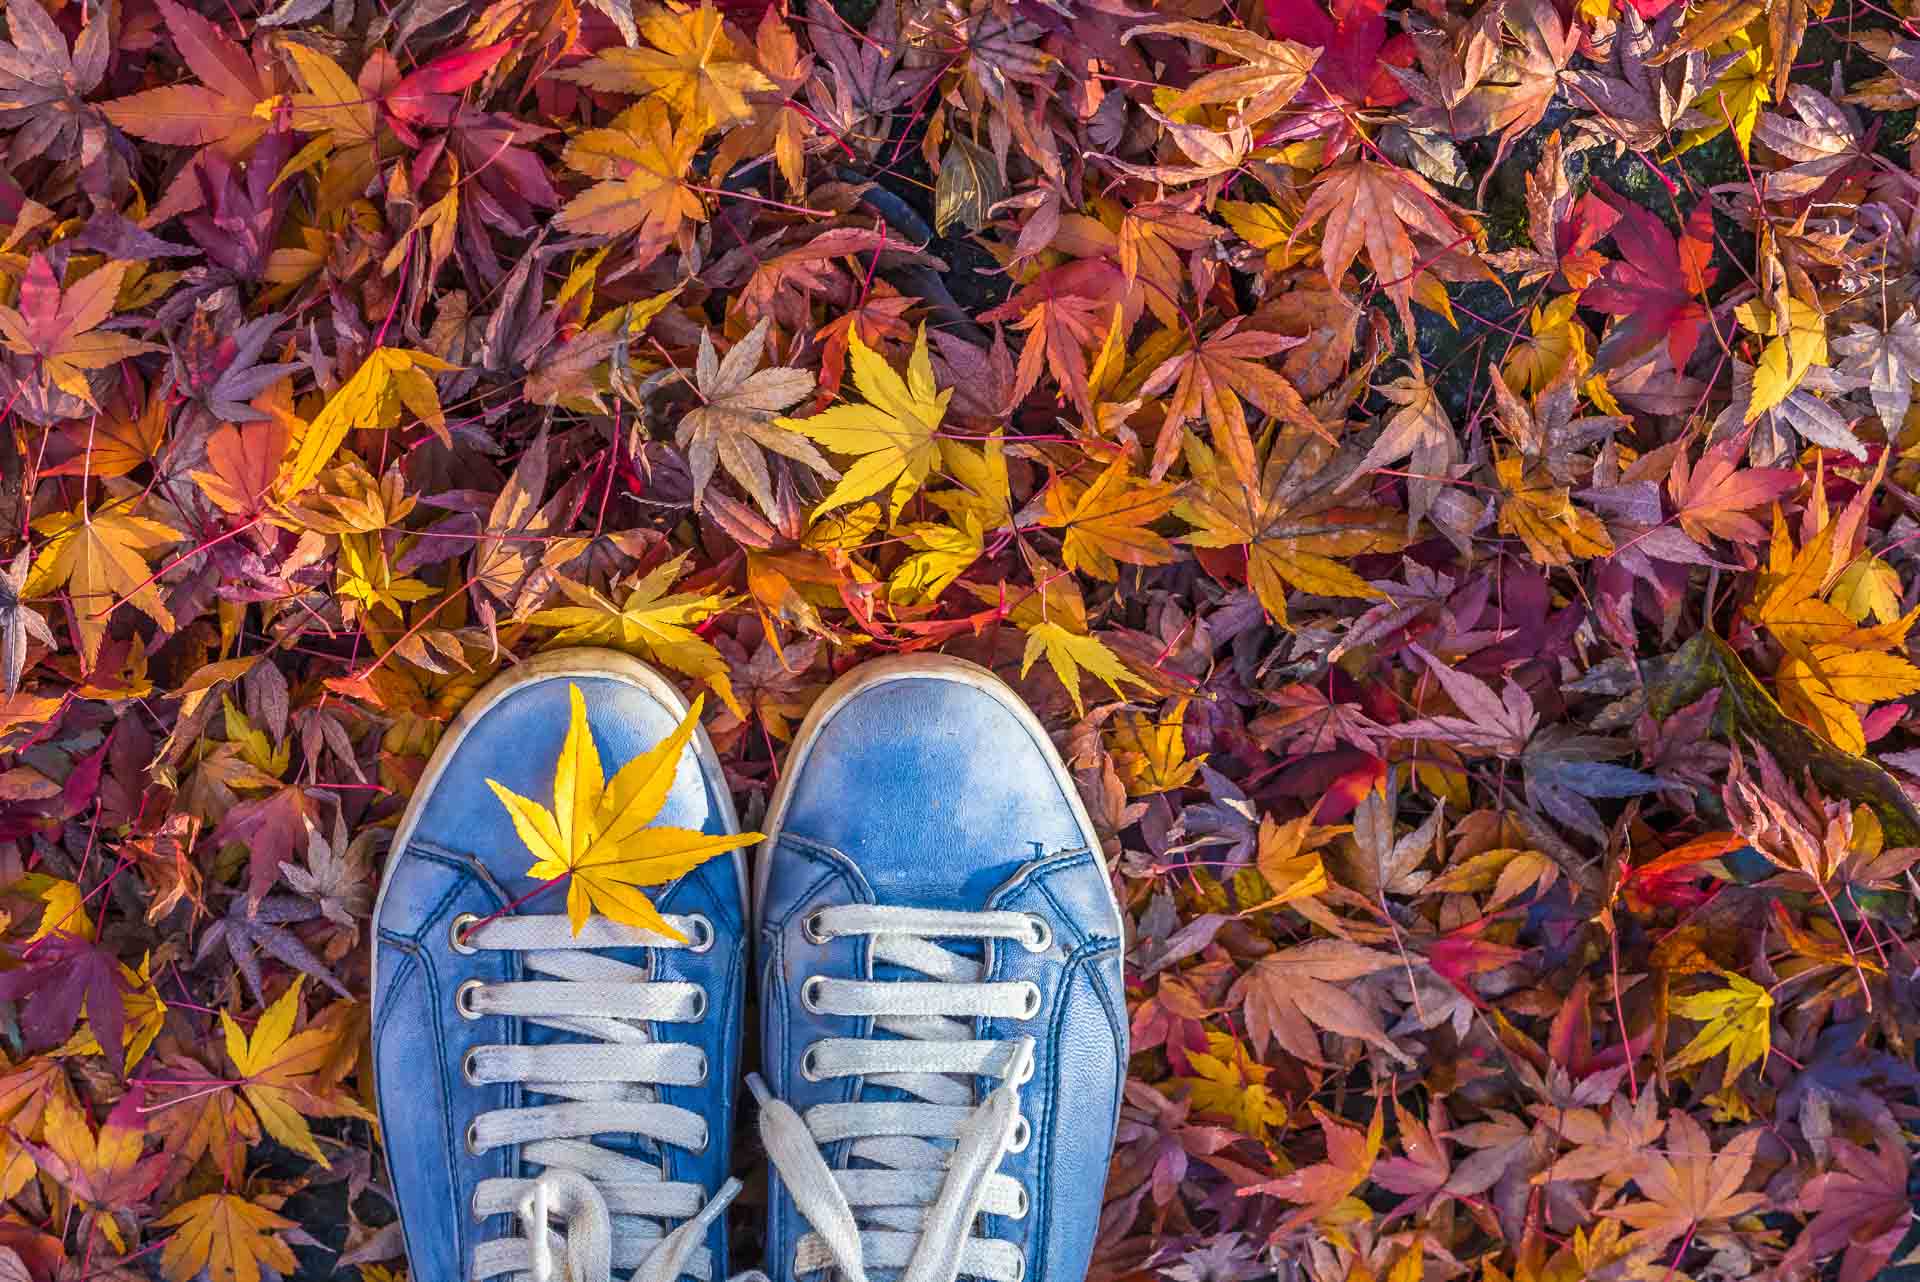 Autumn season in hipster style shoes